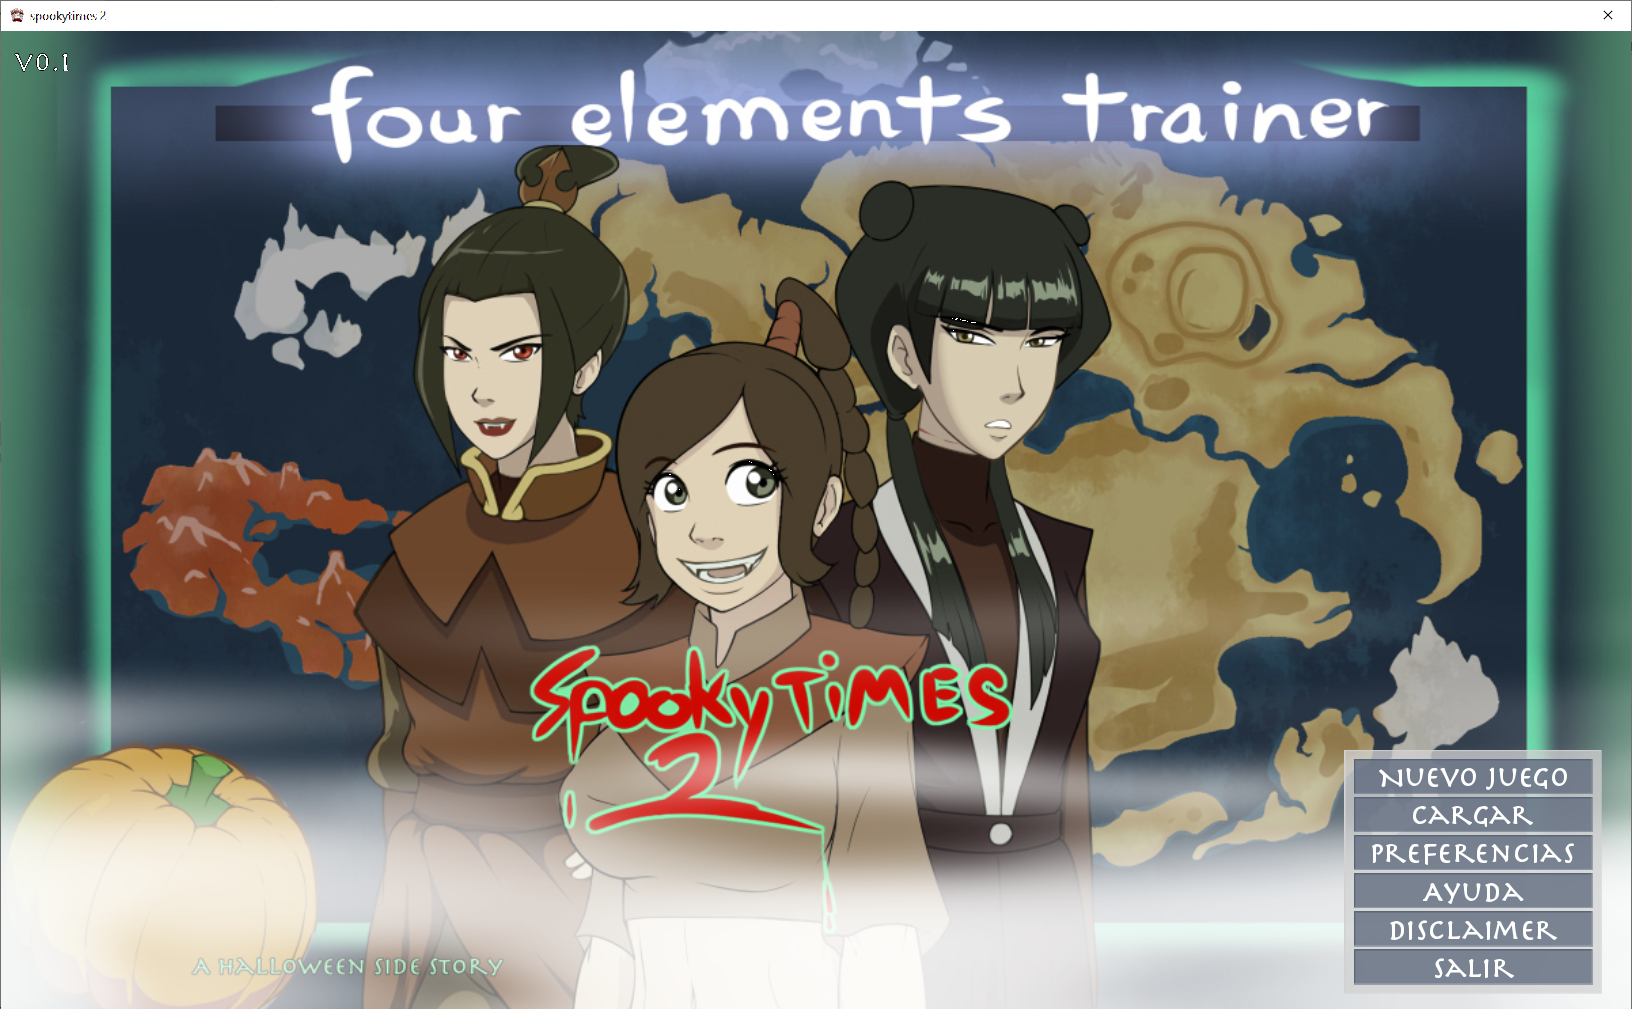 Four elements Trainer Spookytimes 2. Four elements Trainer spookytimes3. 4 Elements Trainer азула. Spooky times 2 - a four elements Side story, Part 2. Elements trainer на андроид на русском